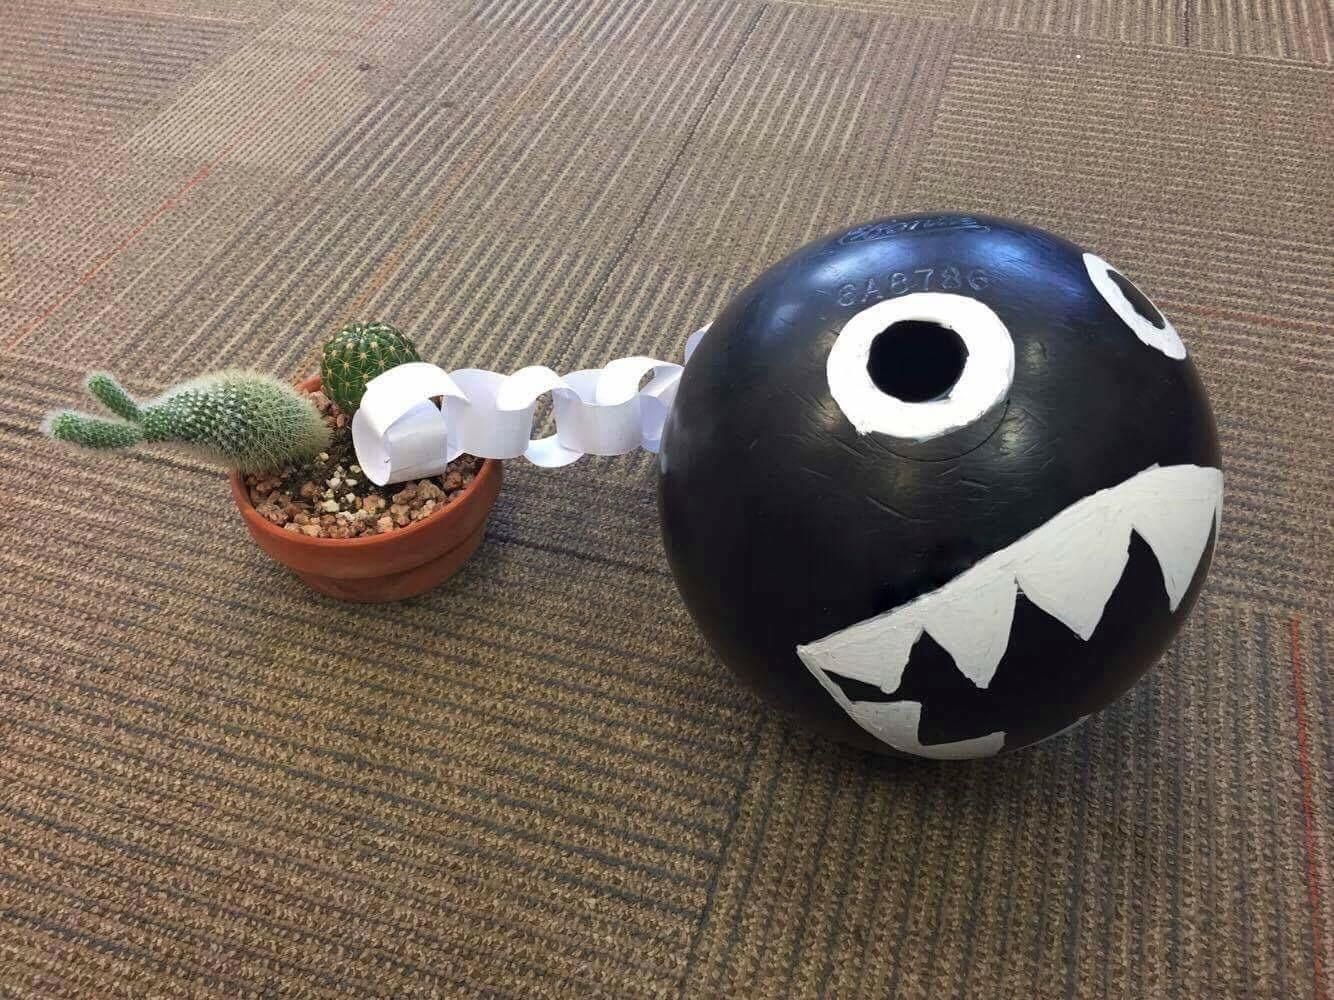 We keep finding new things to do with the office bowling ball.